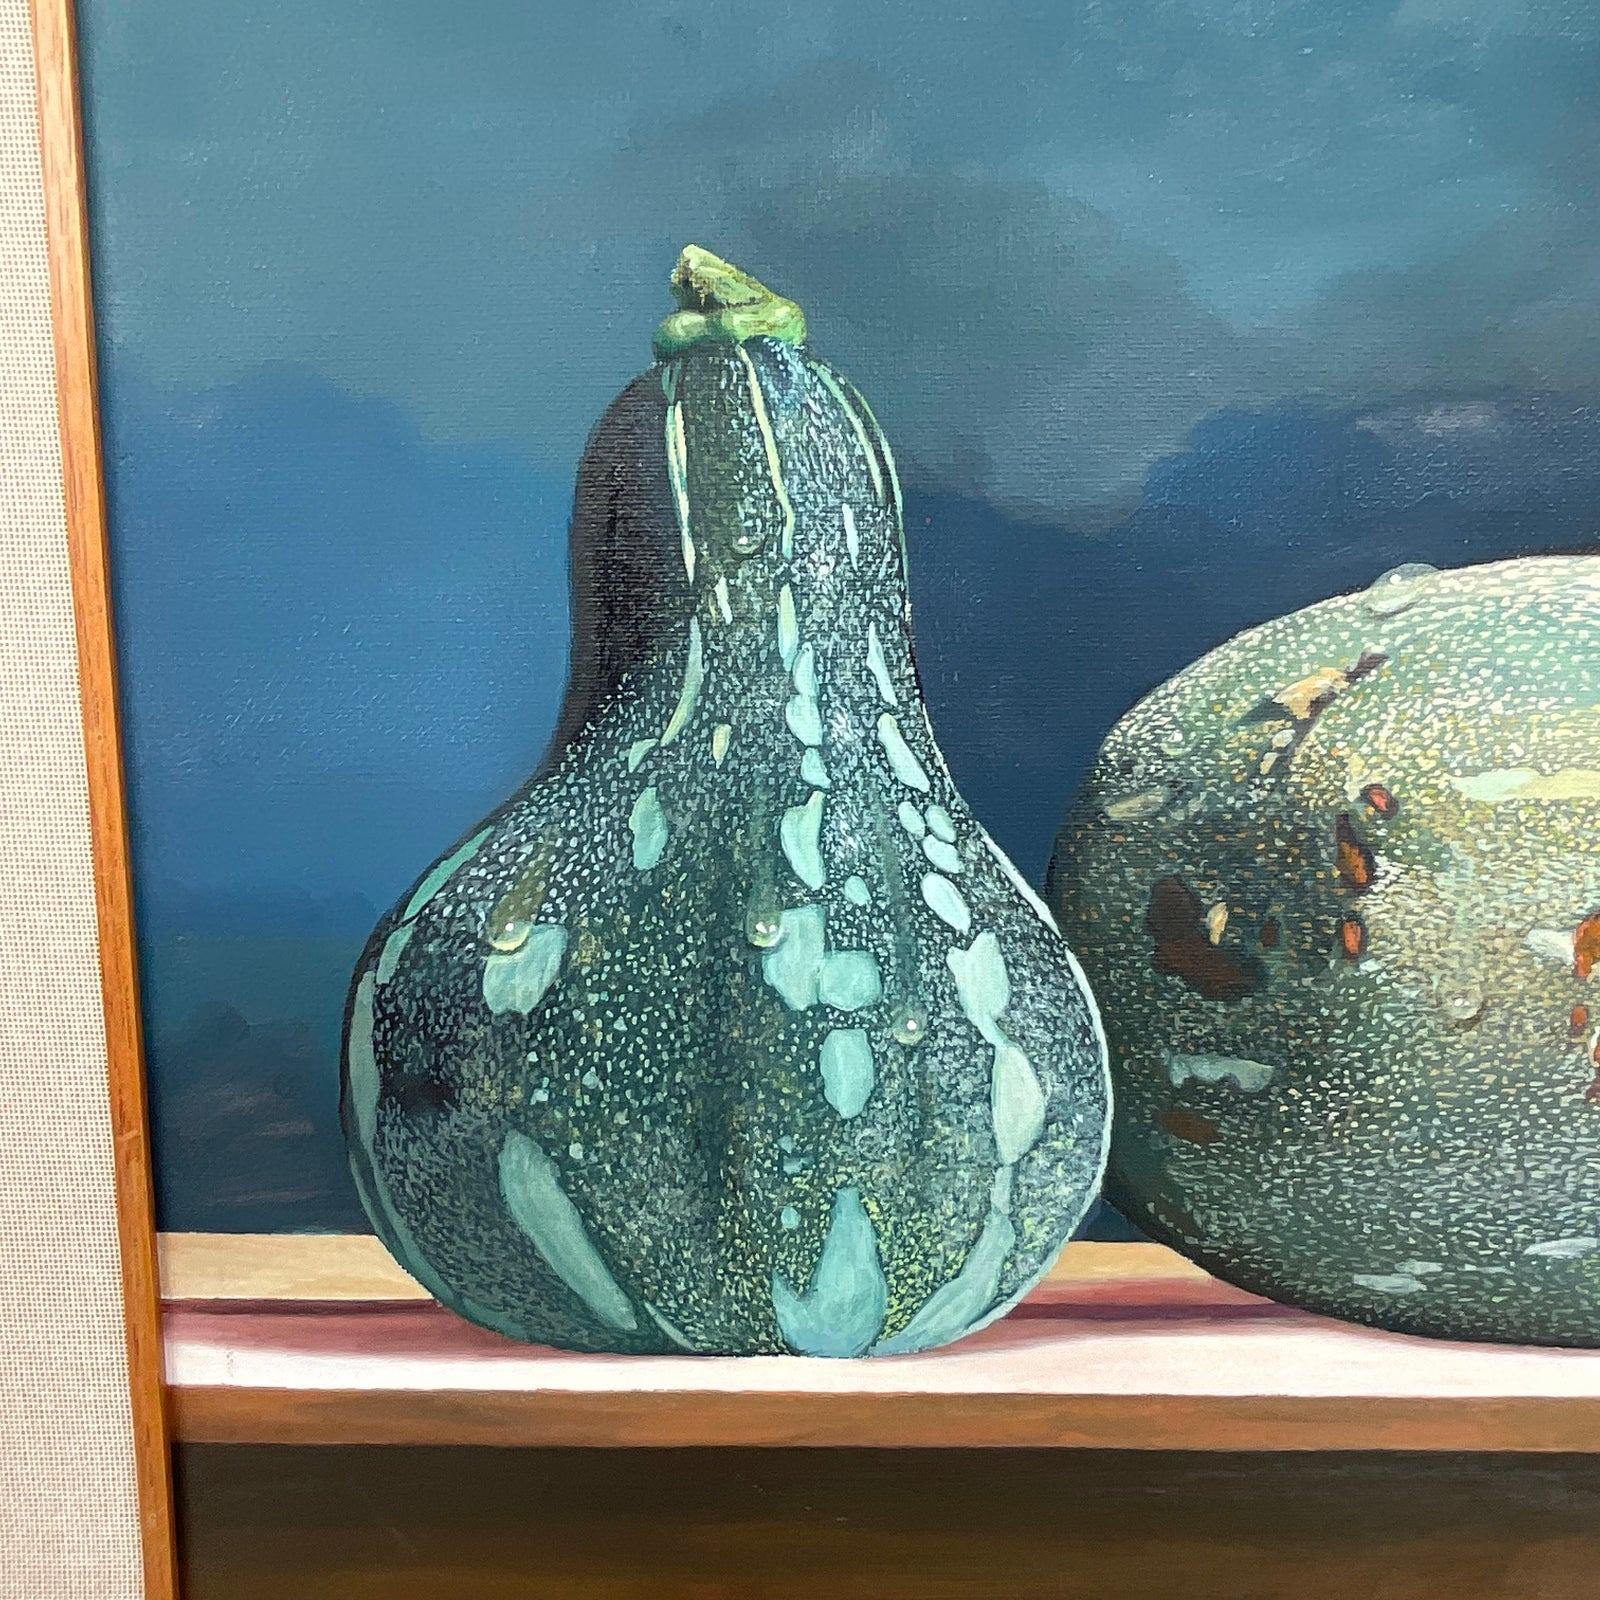 A spectacular vintage Boho Original Oil painting on canvas. A chic hyper realistic Still life composition of two gourds. Signed by the artist Lopez. Acquired from a Palm Beach estate.